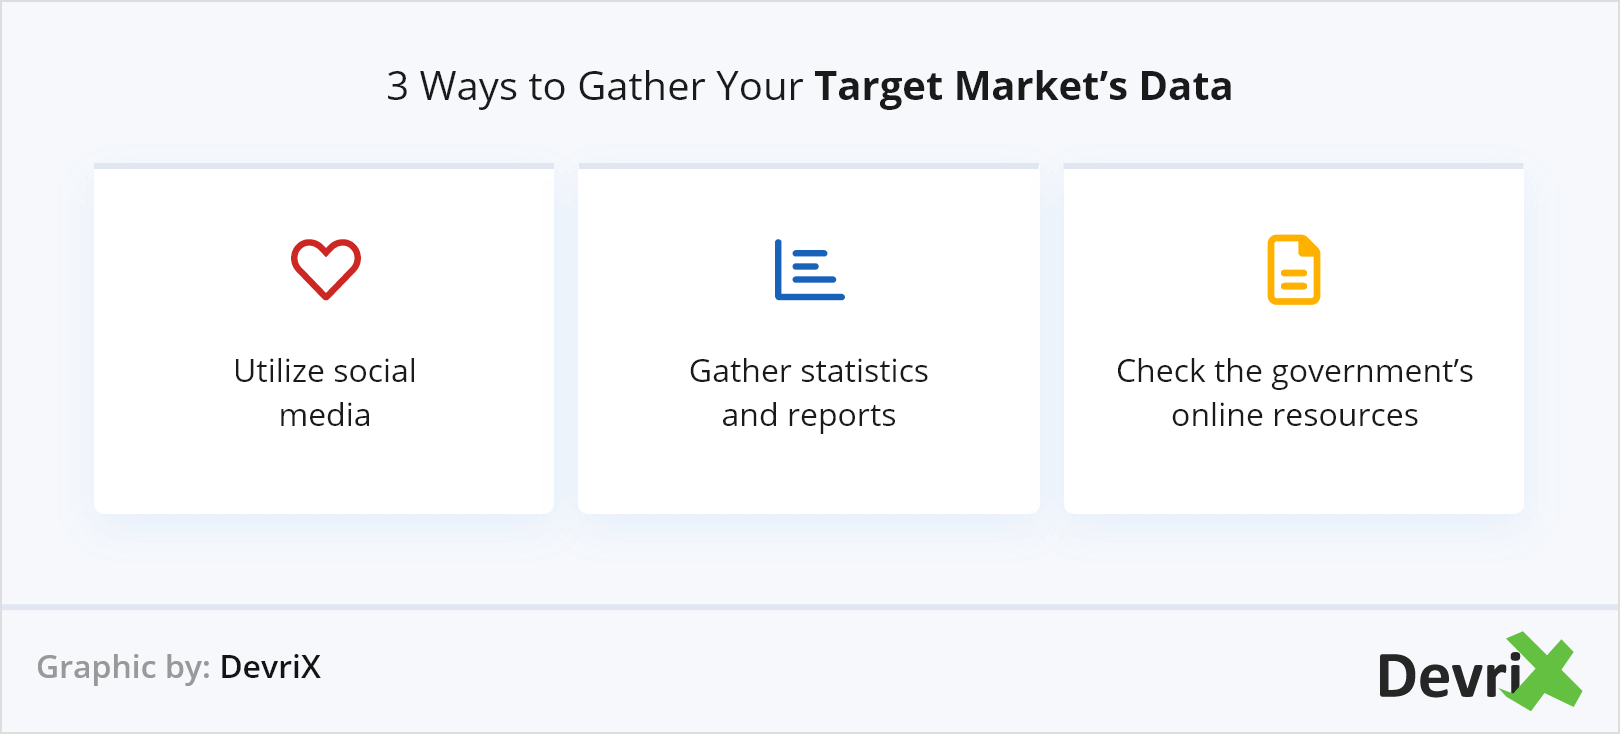 3 Ways to Gather Your Target Market’s Data